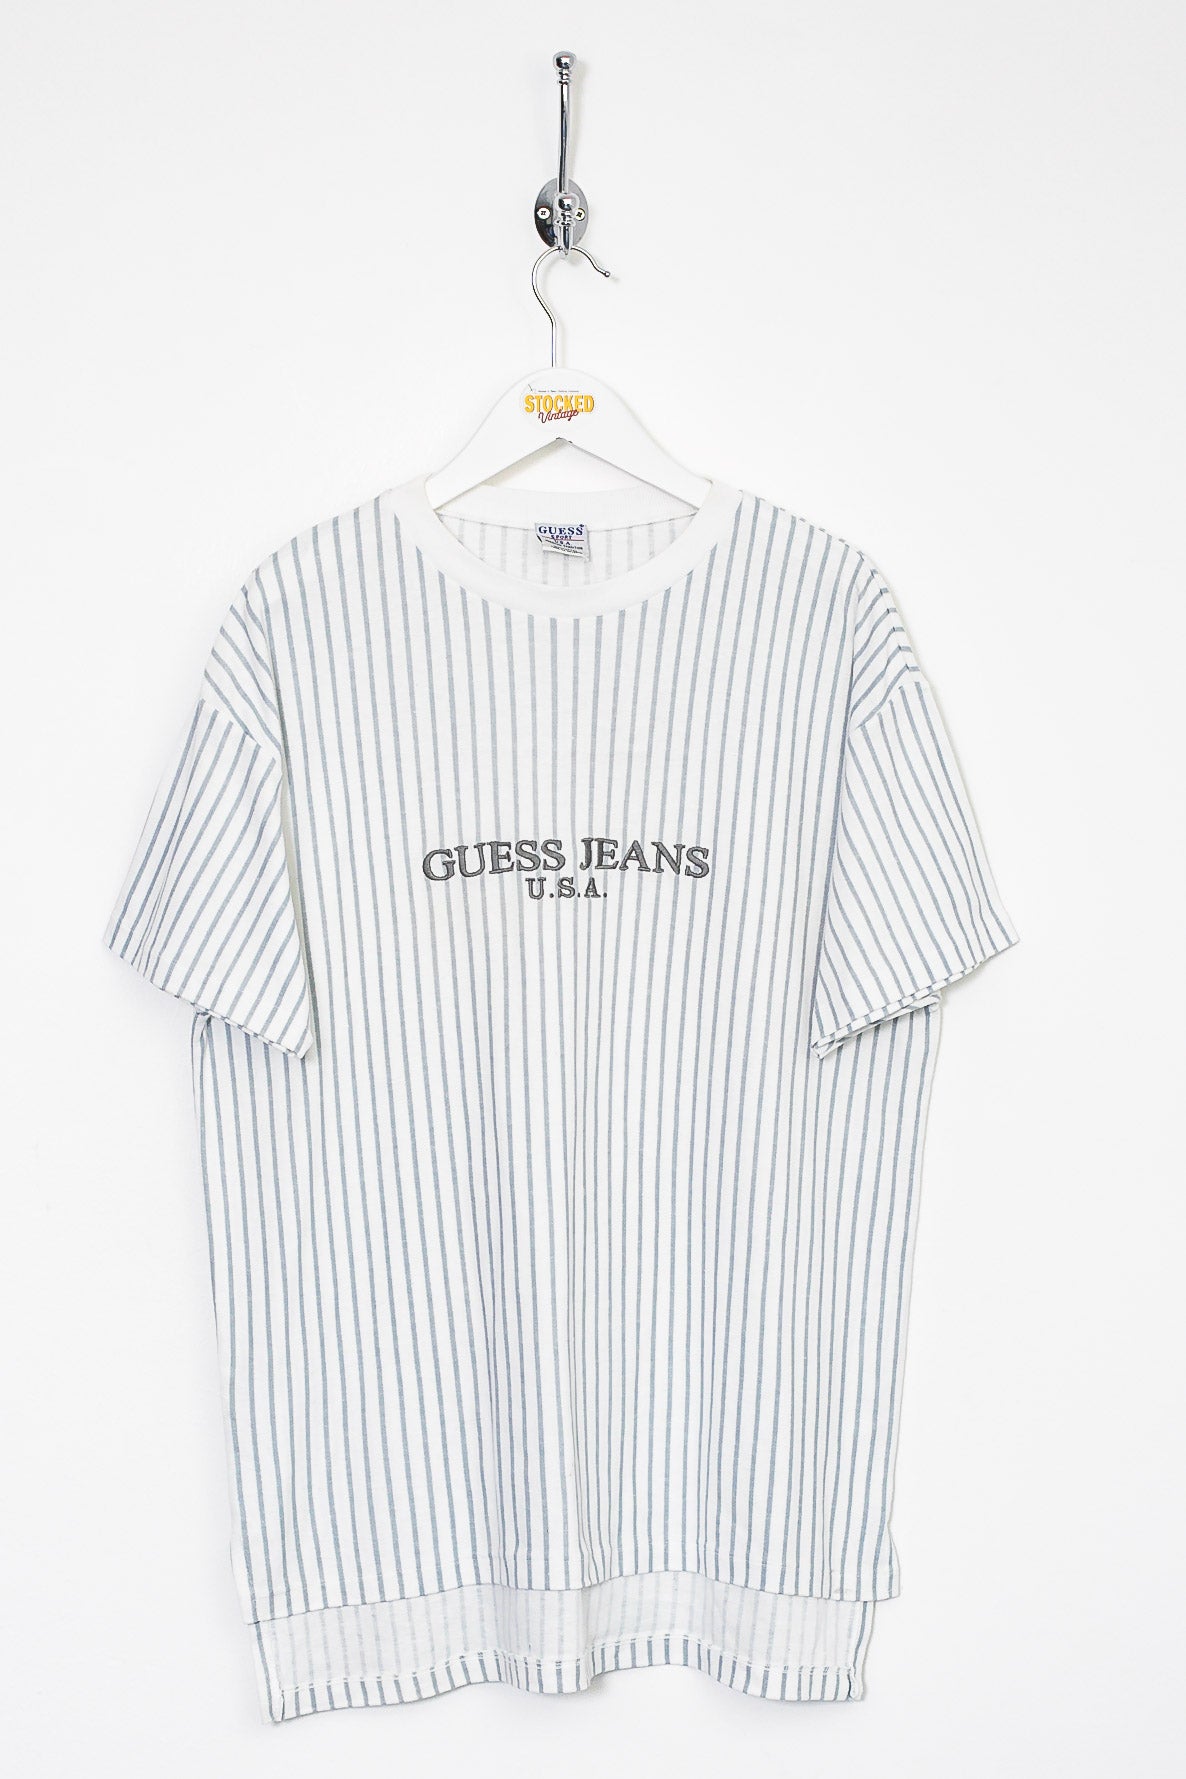 Guess Jeans Tee (M)